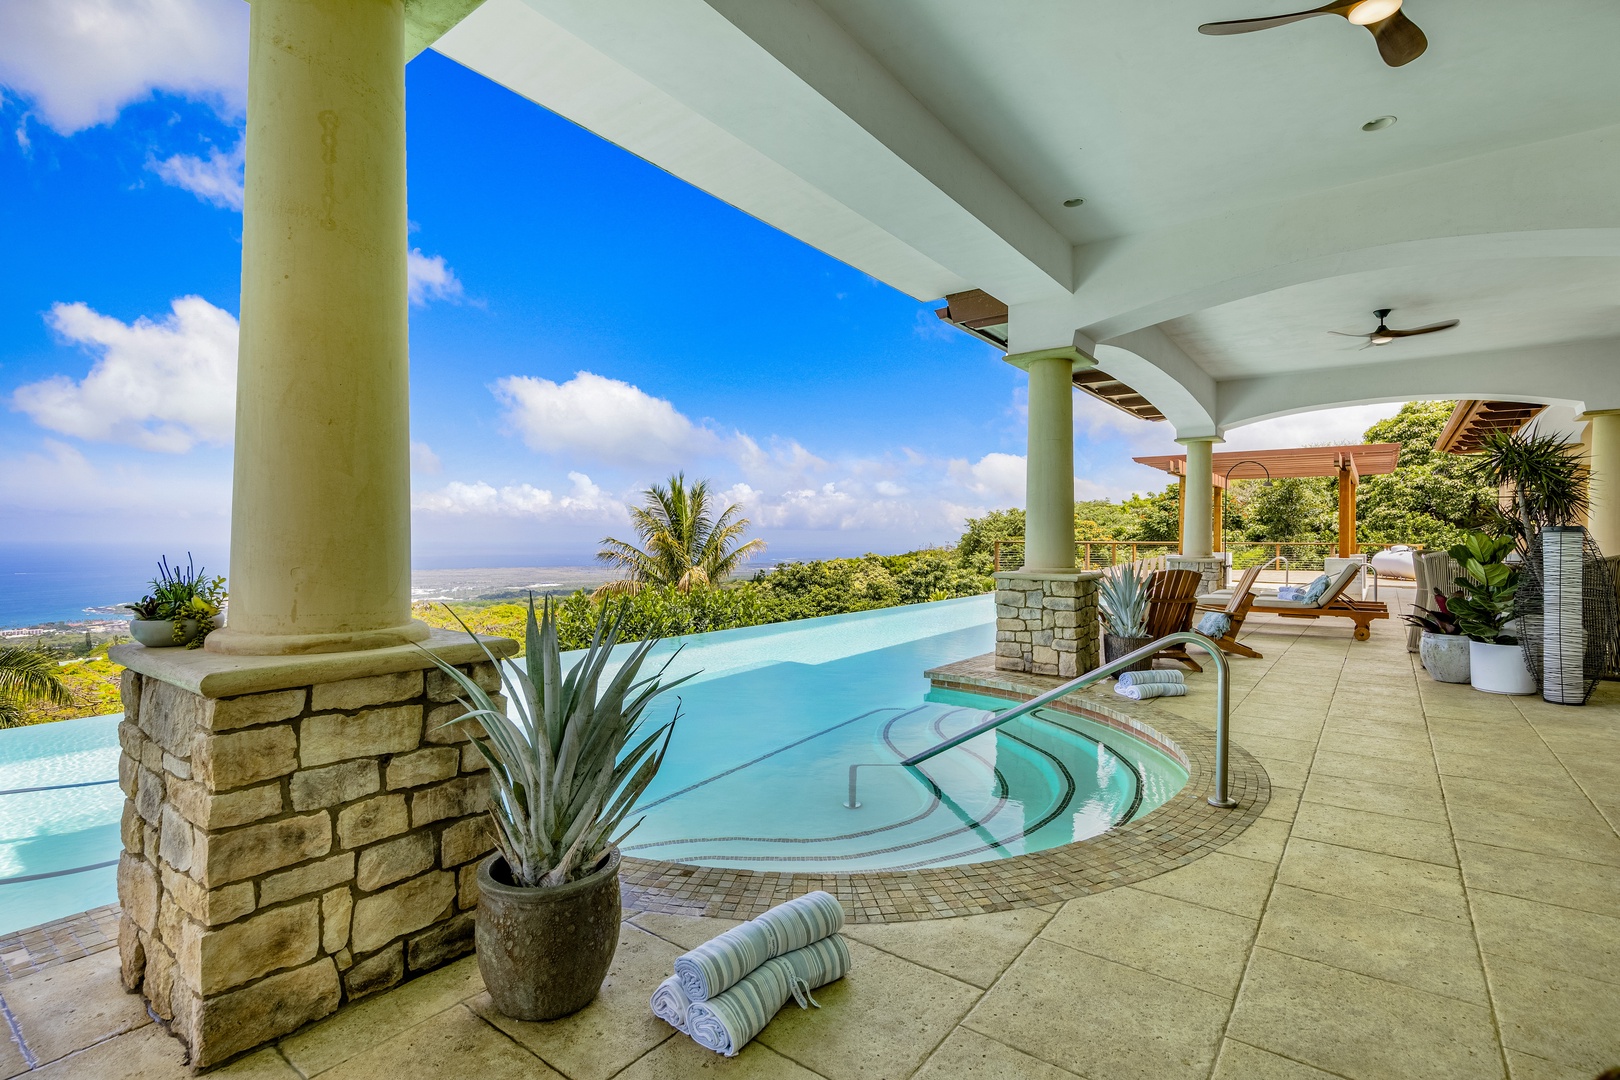 Kailua Kona Vacation Rentals, Kailua Kona Estate** - Take in the scenic views from the pool or sit under the covered lanai.